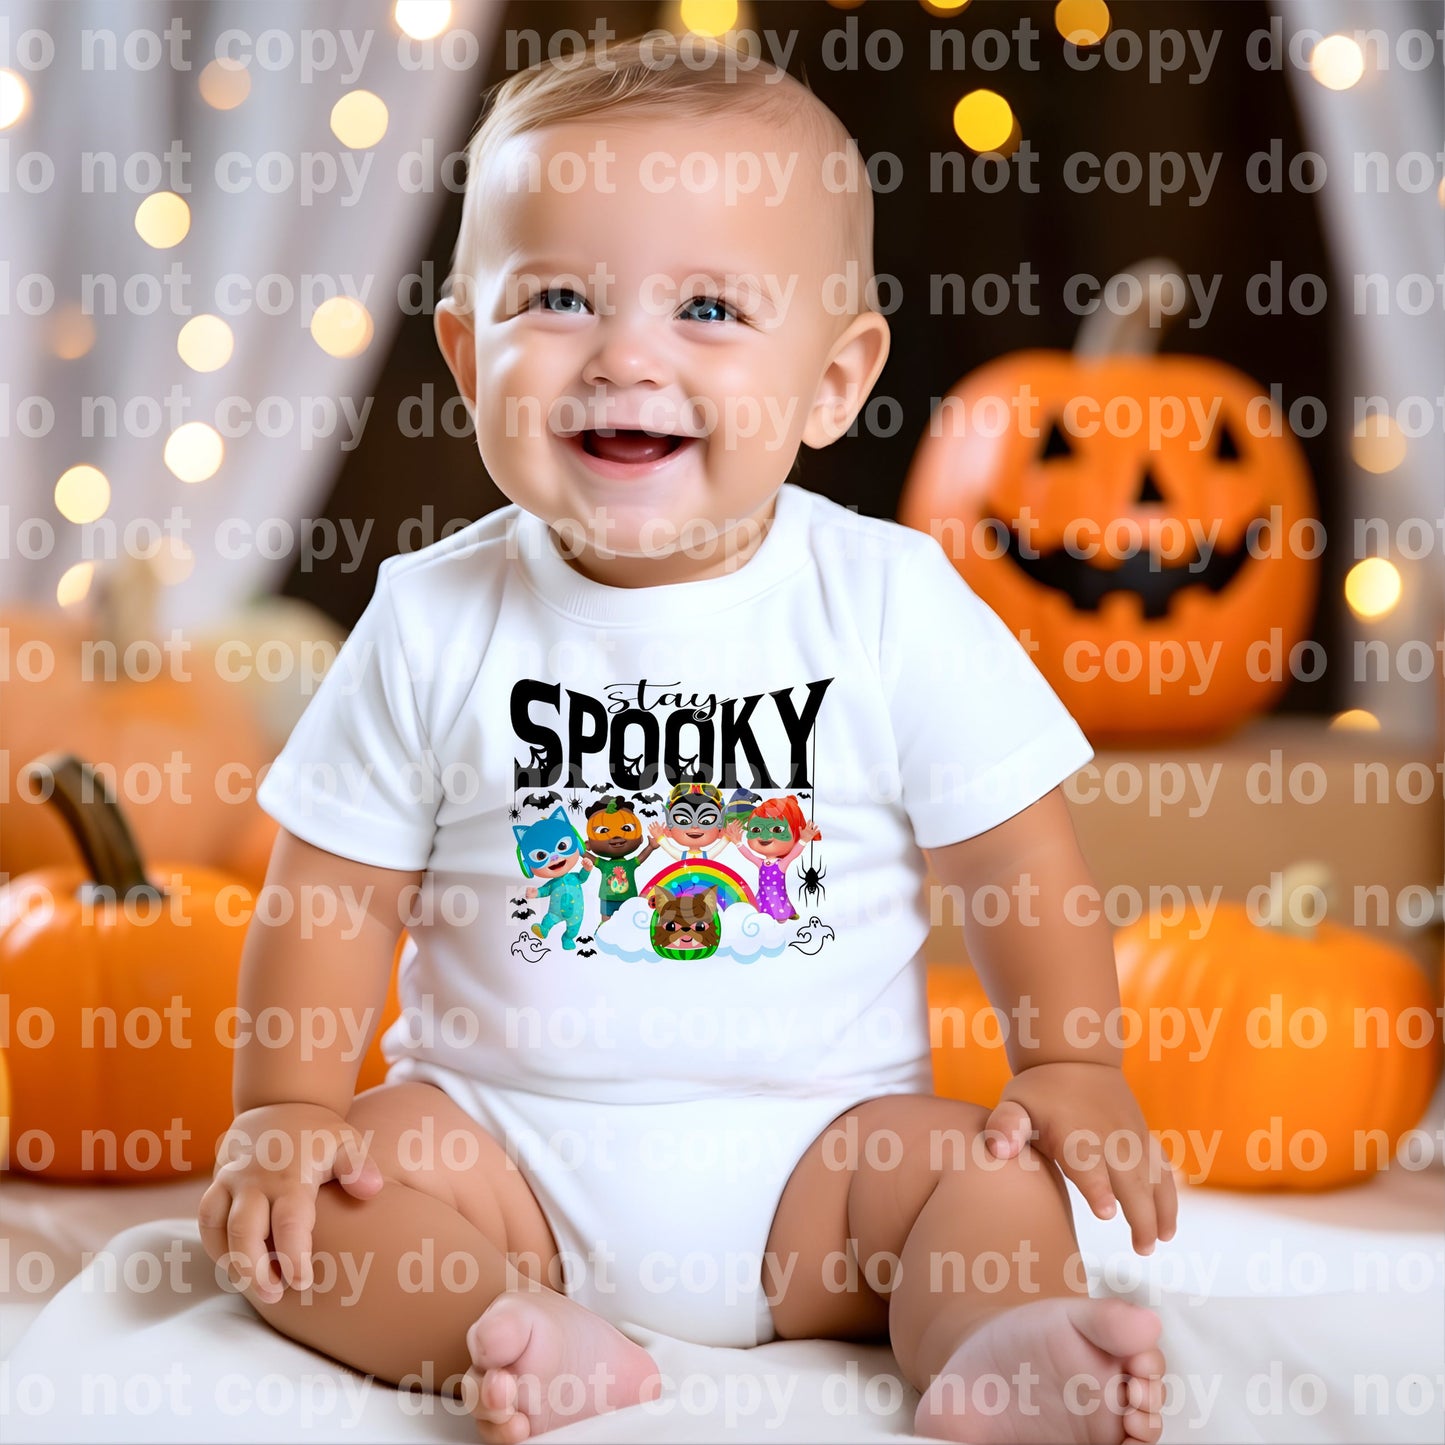 Stay Spooky Kids Melon Dream Print or Sublimation Print